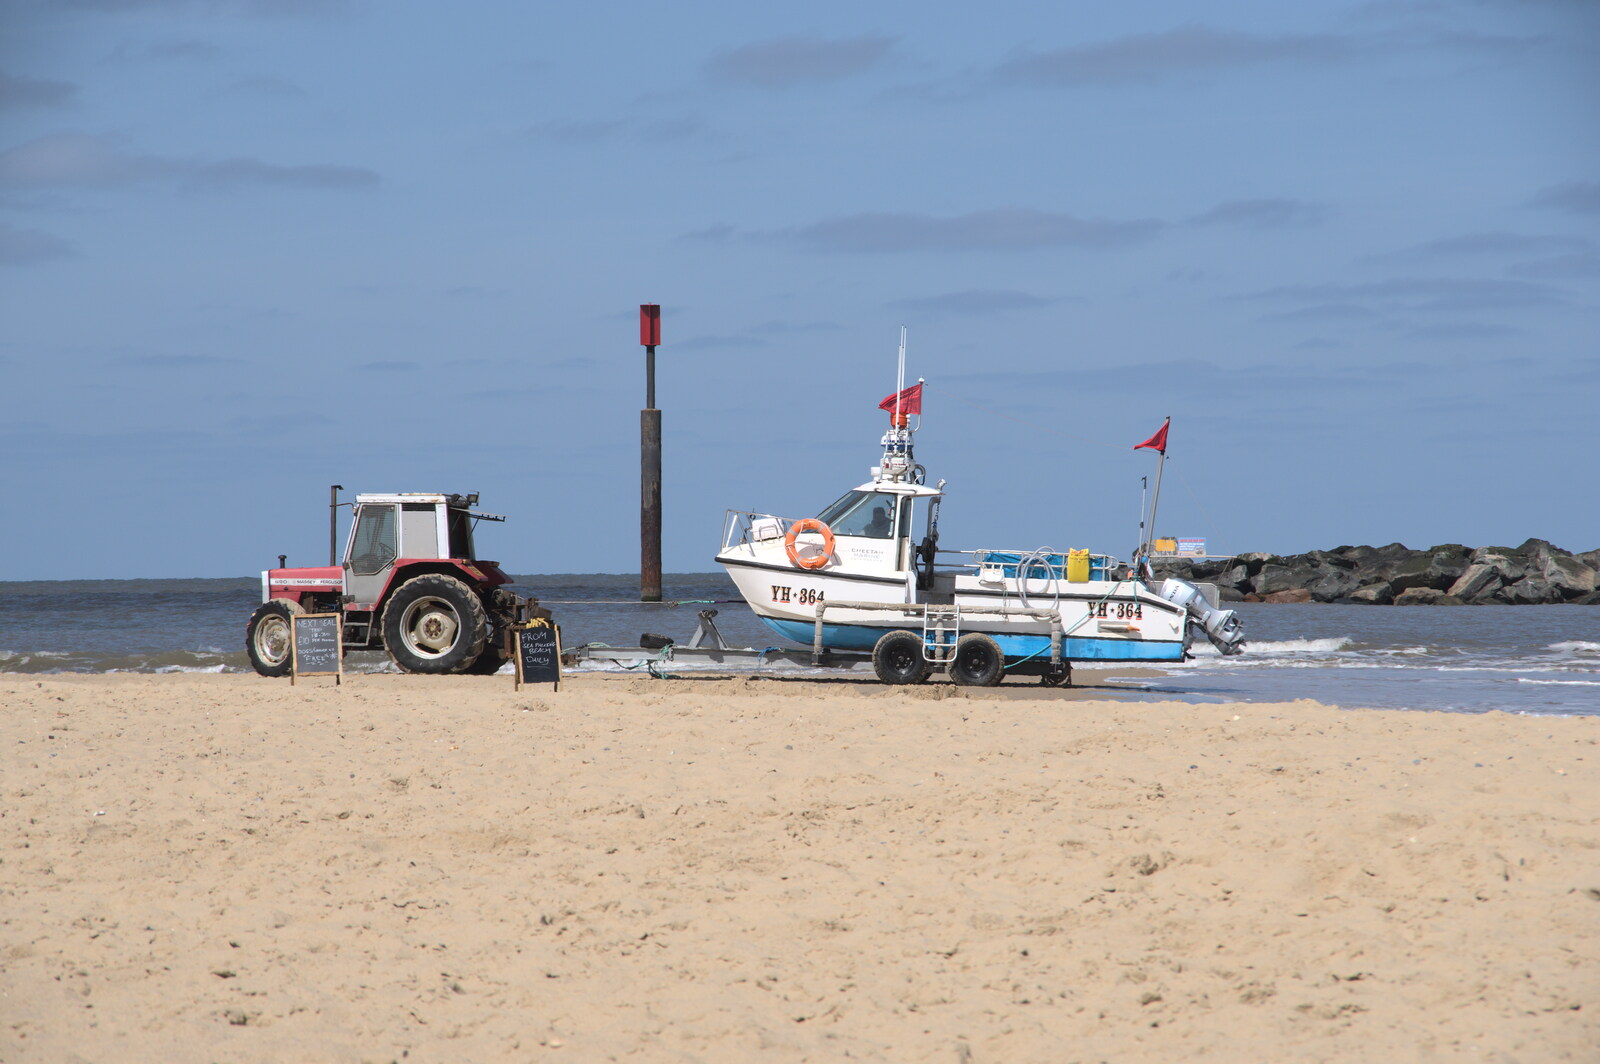 A tour boat and tractor wait on the beach from On the Beach at Sea Palling, Norfolk - 8th May 2022